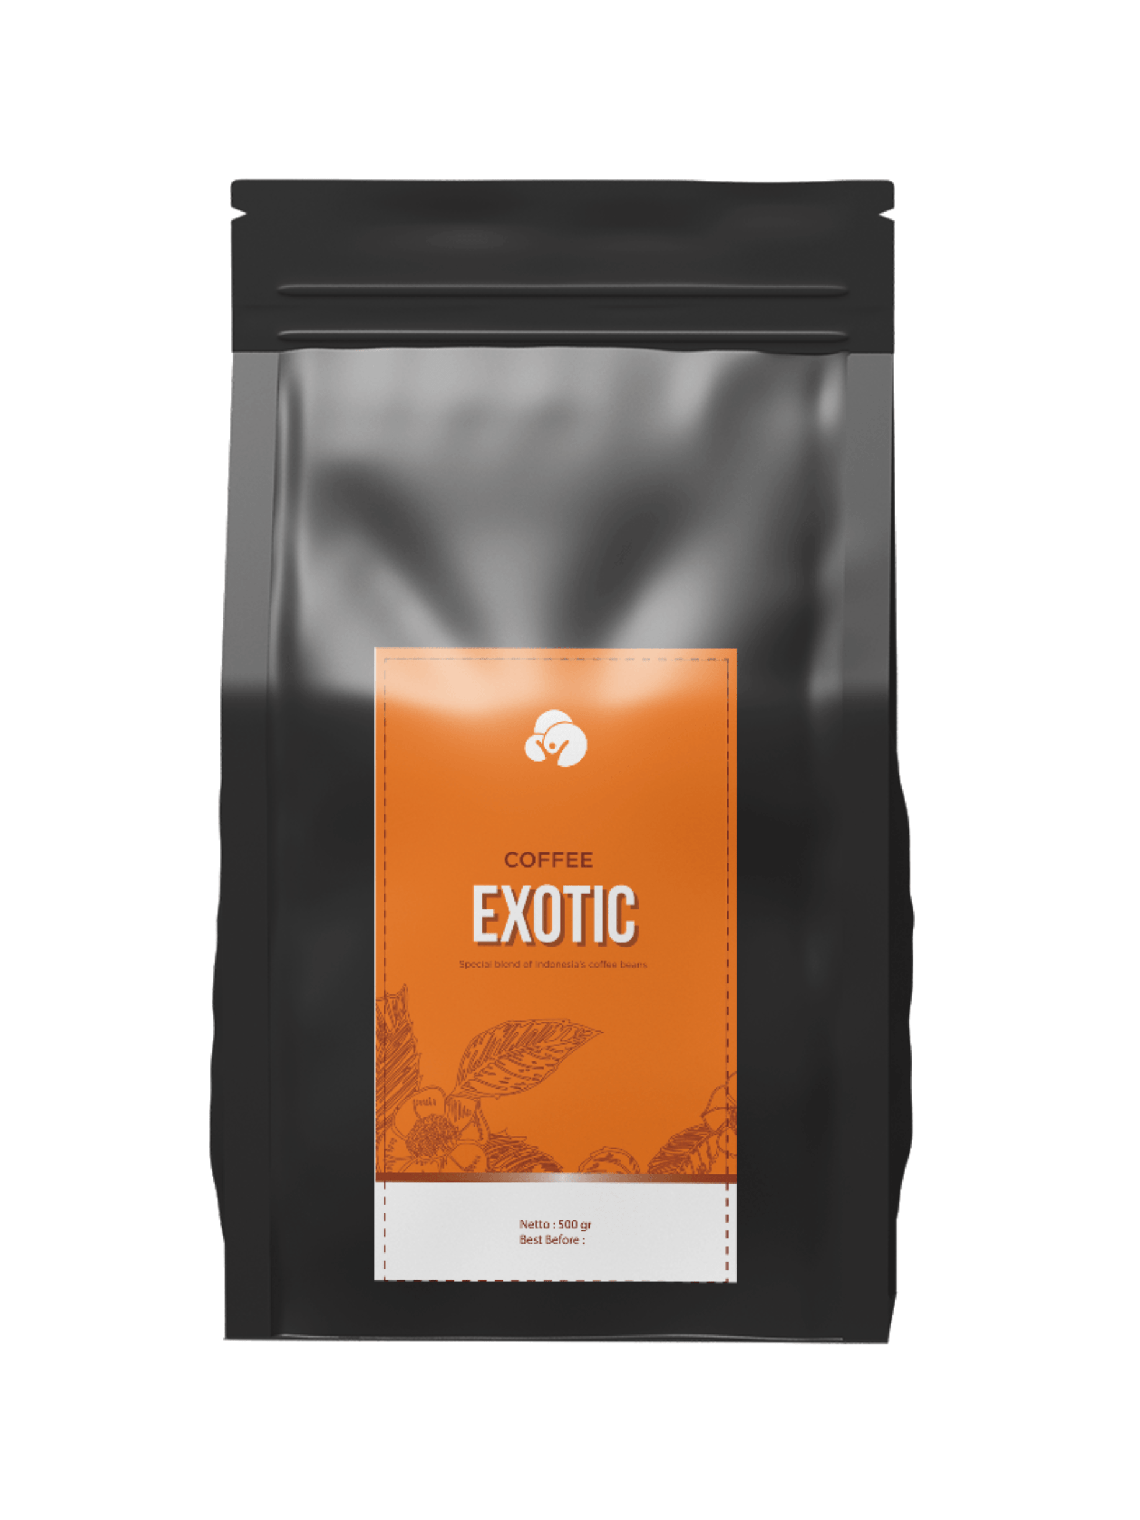 30 ml Health Today Exotic Coffee